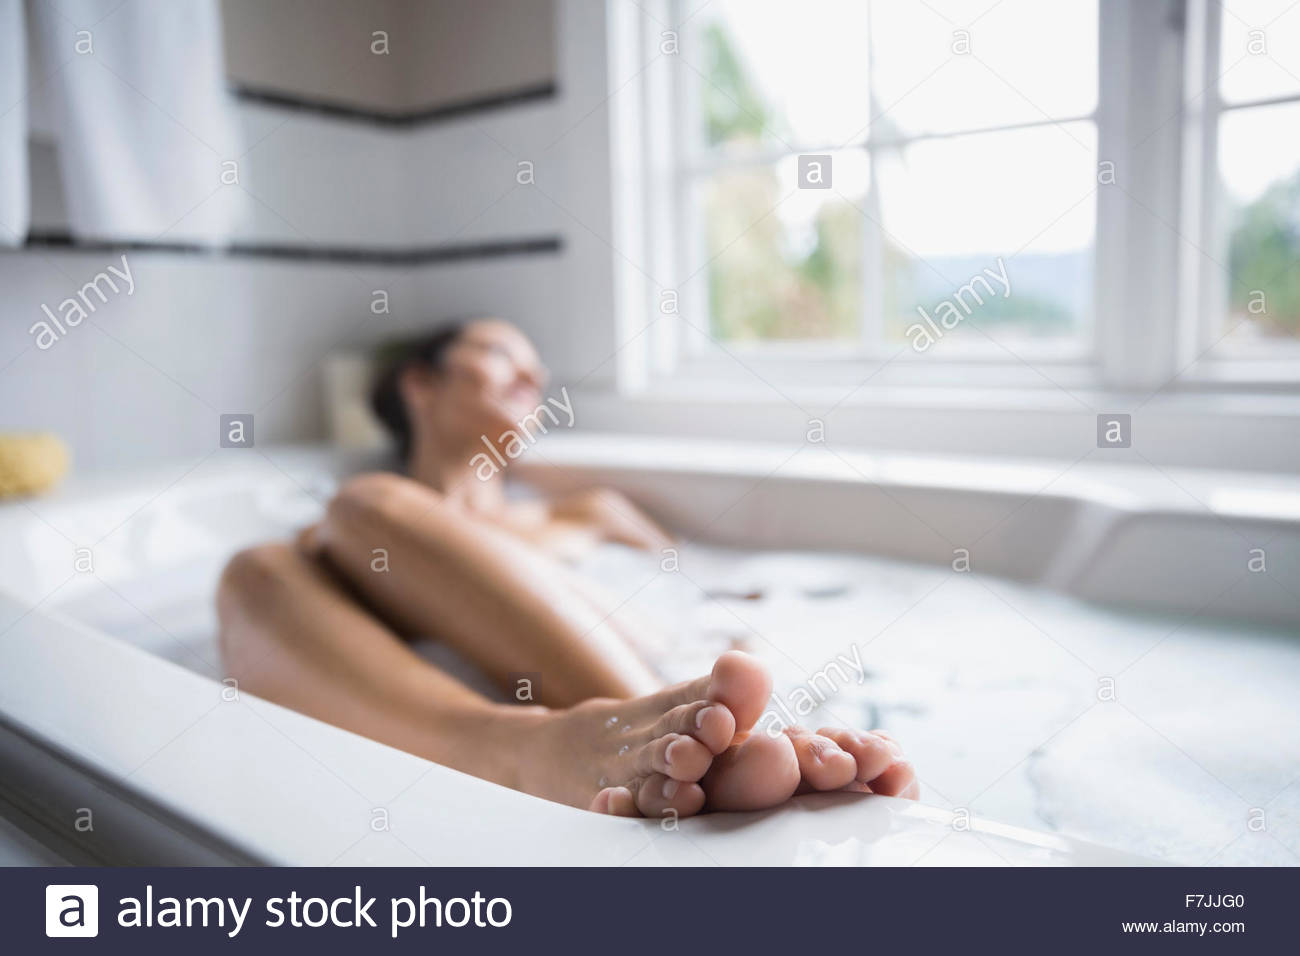 Serene woman with feet up in bubble bath Stock Photo